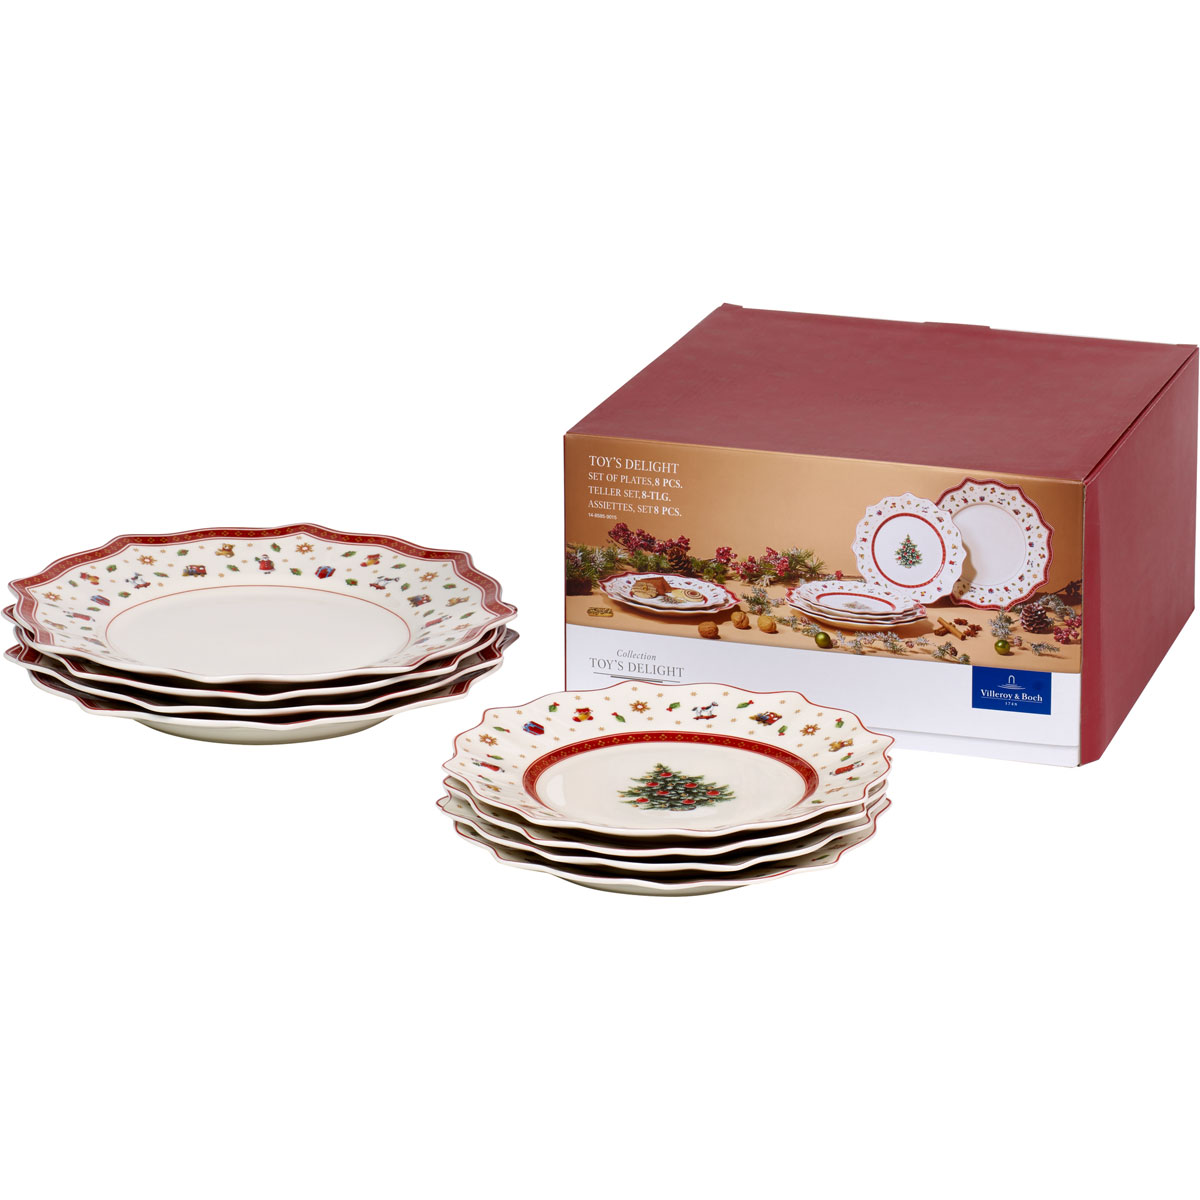 Villeroy and Boch Toys Delight 8 Plate Set